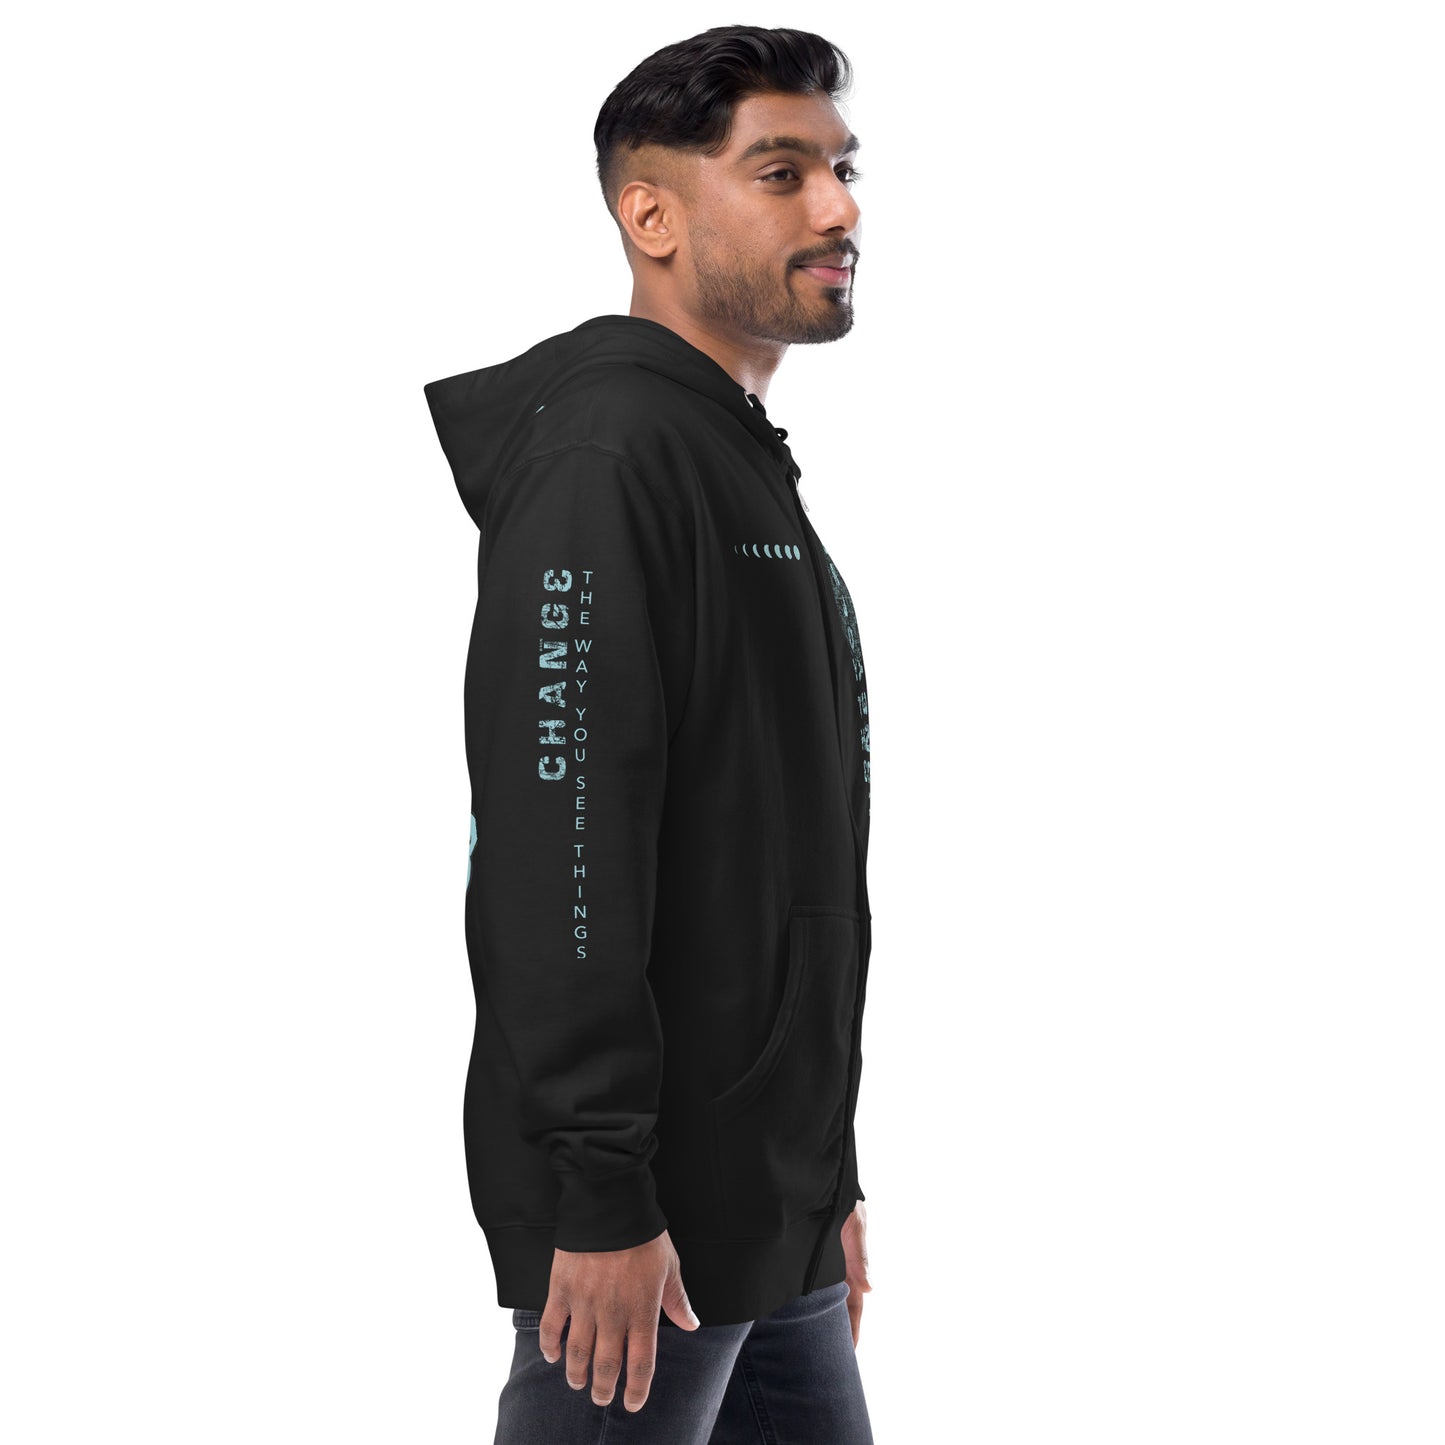 The Only Way Out Hoodie